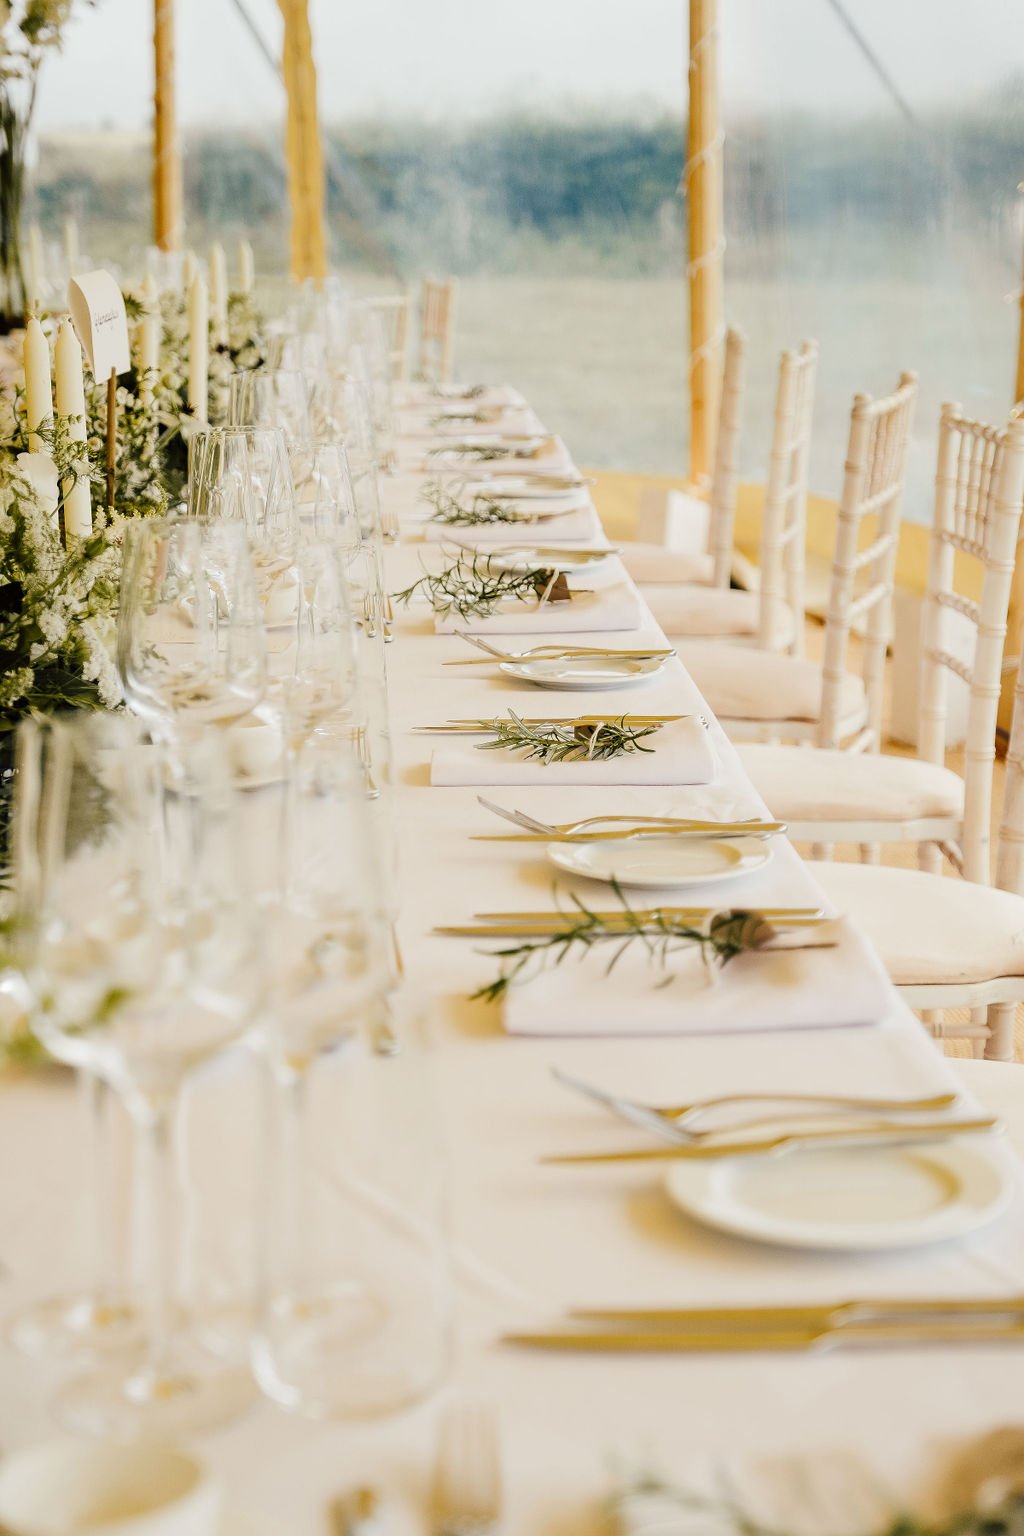 Tablescape at summer wedding featuring white candles and green foliage